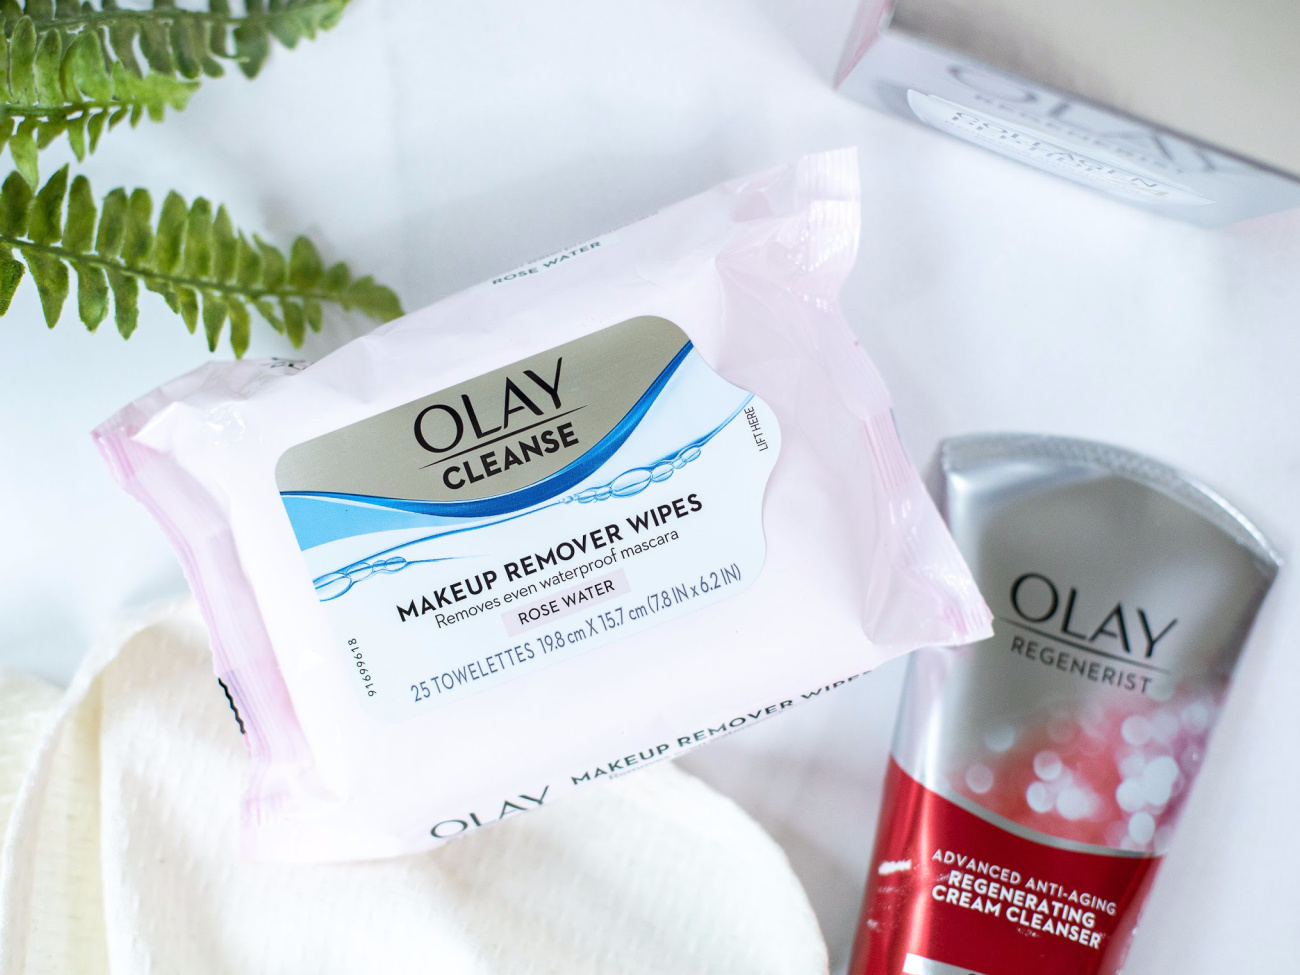 Olay Cleansers As Low As $2.99 At Publix on I Heart Publix 3